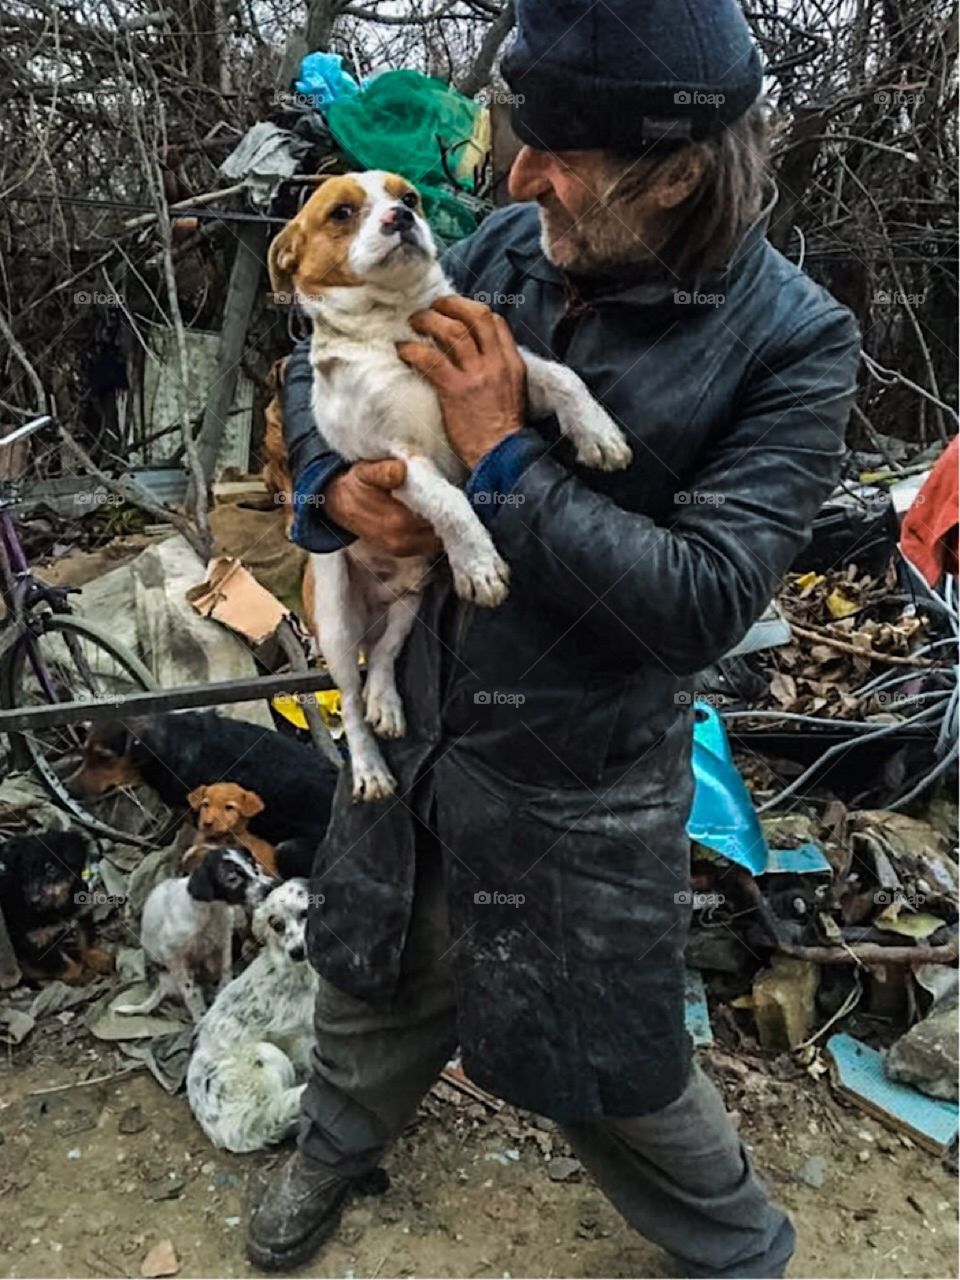 homeless man with his dogs, serbia.